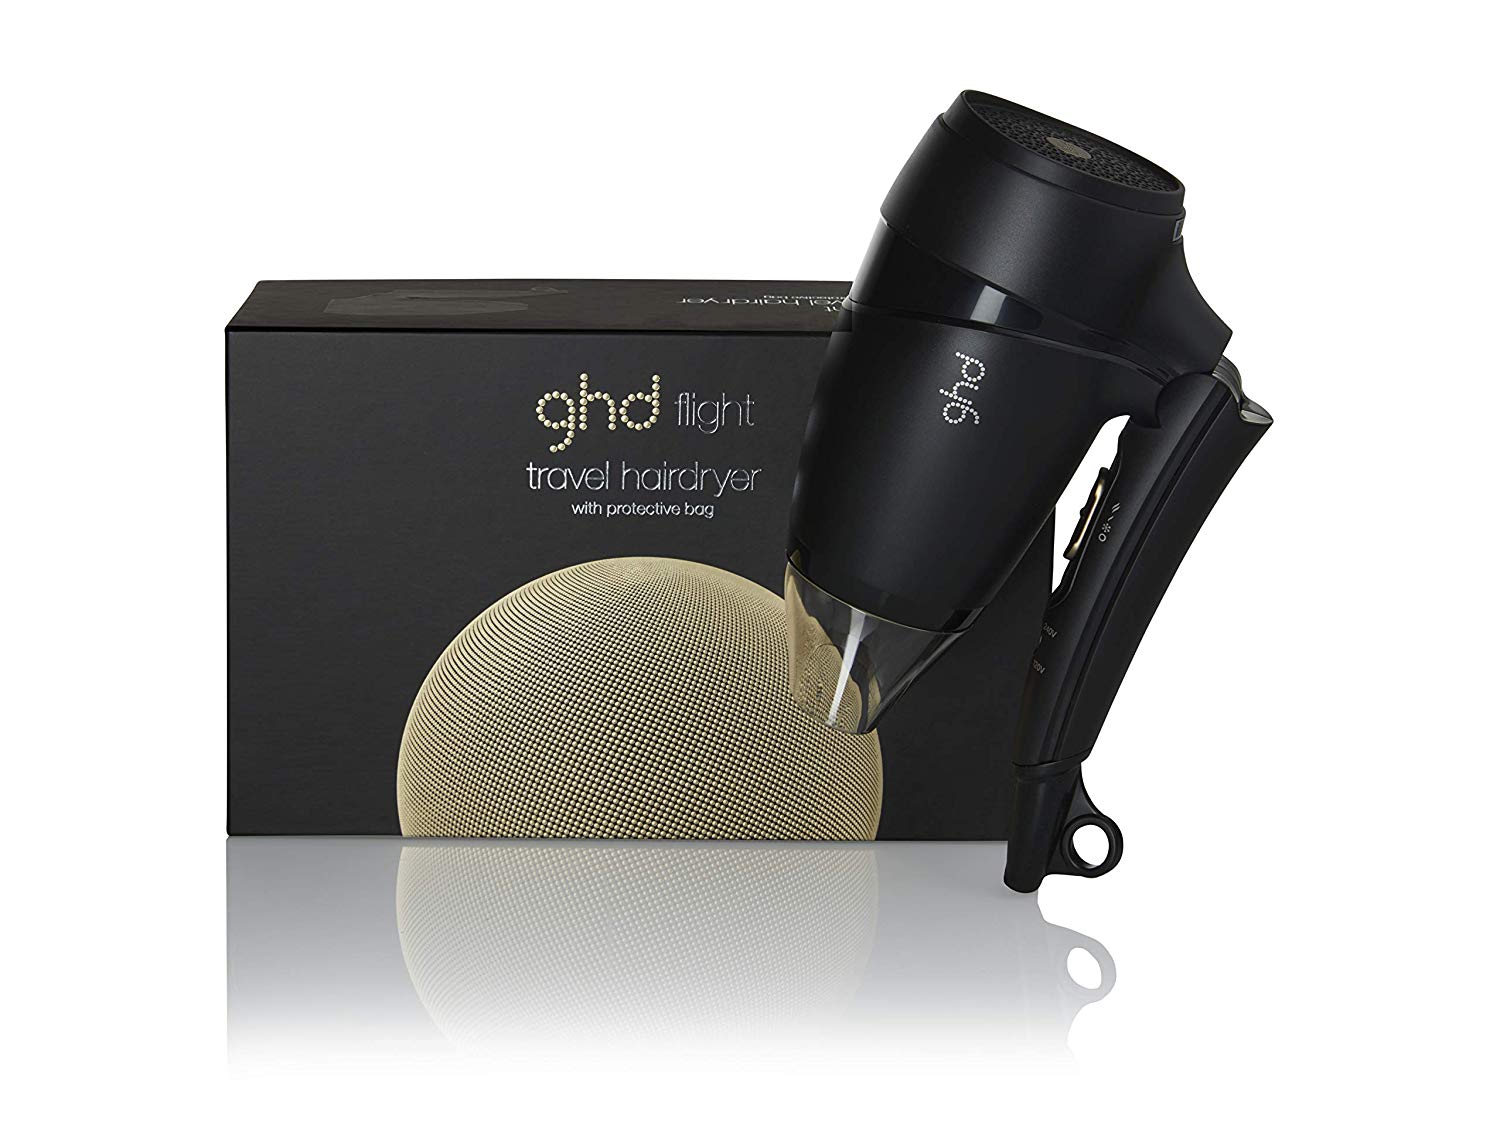 Image of the black folded GHD flight travel hairdryer